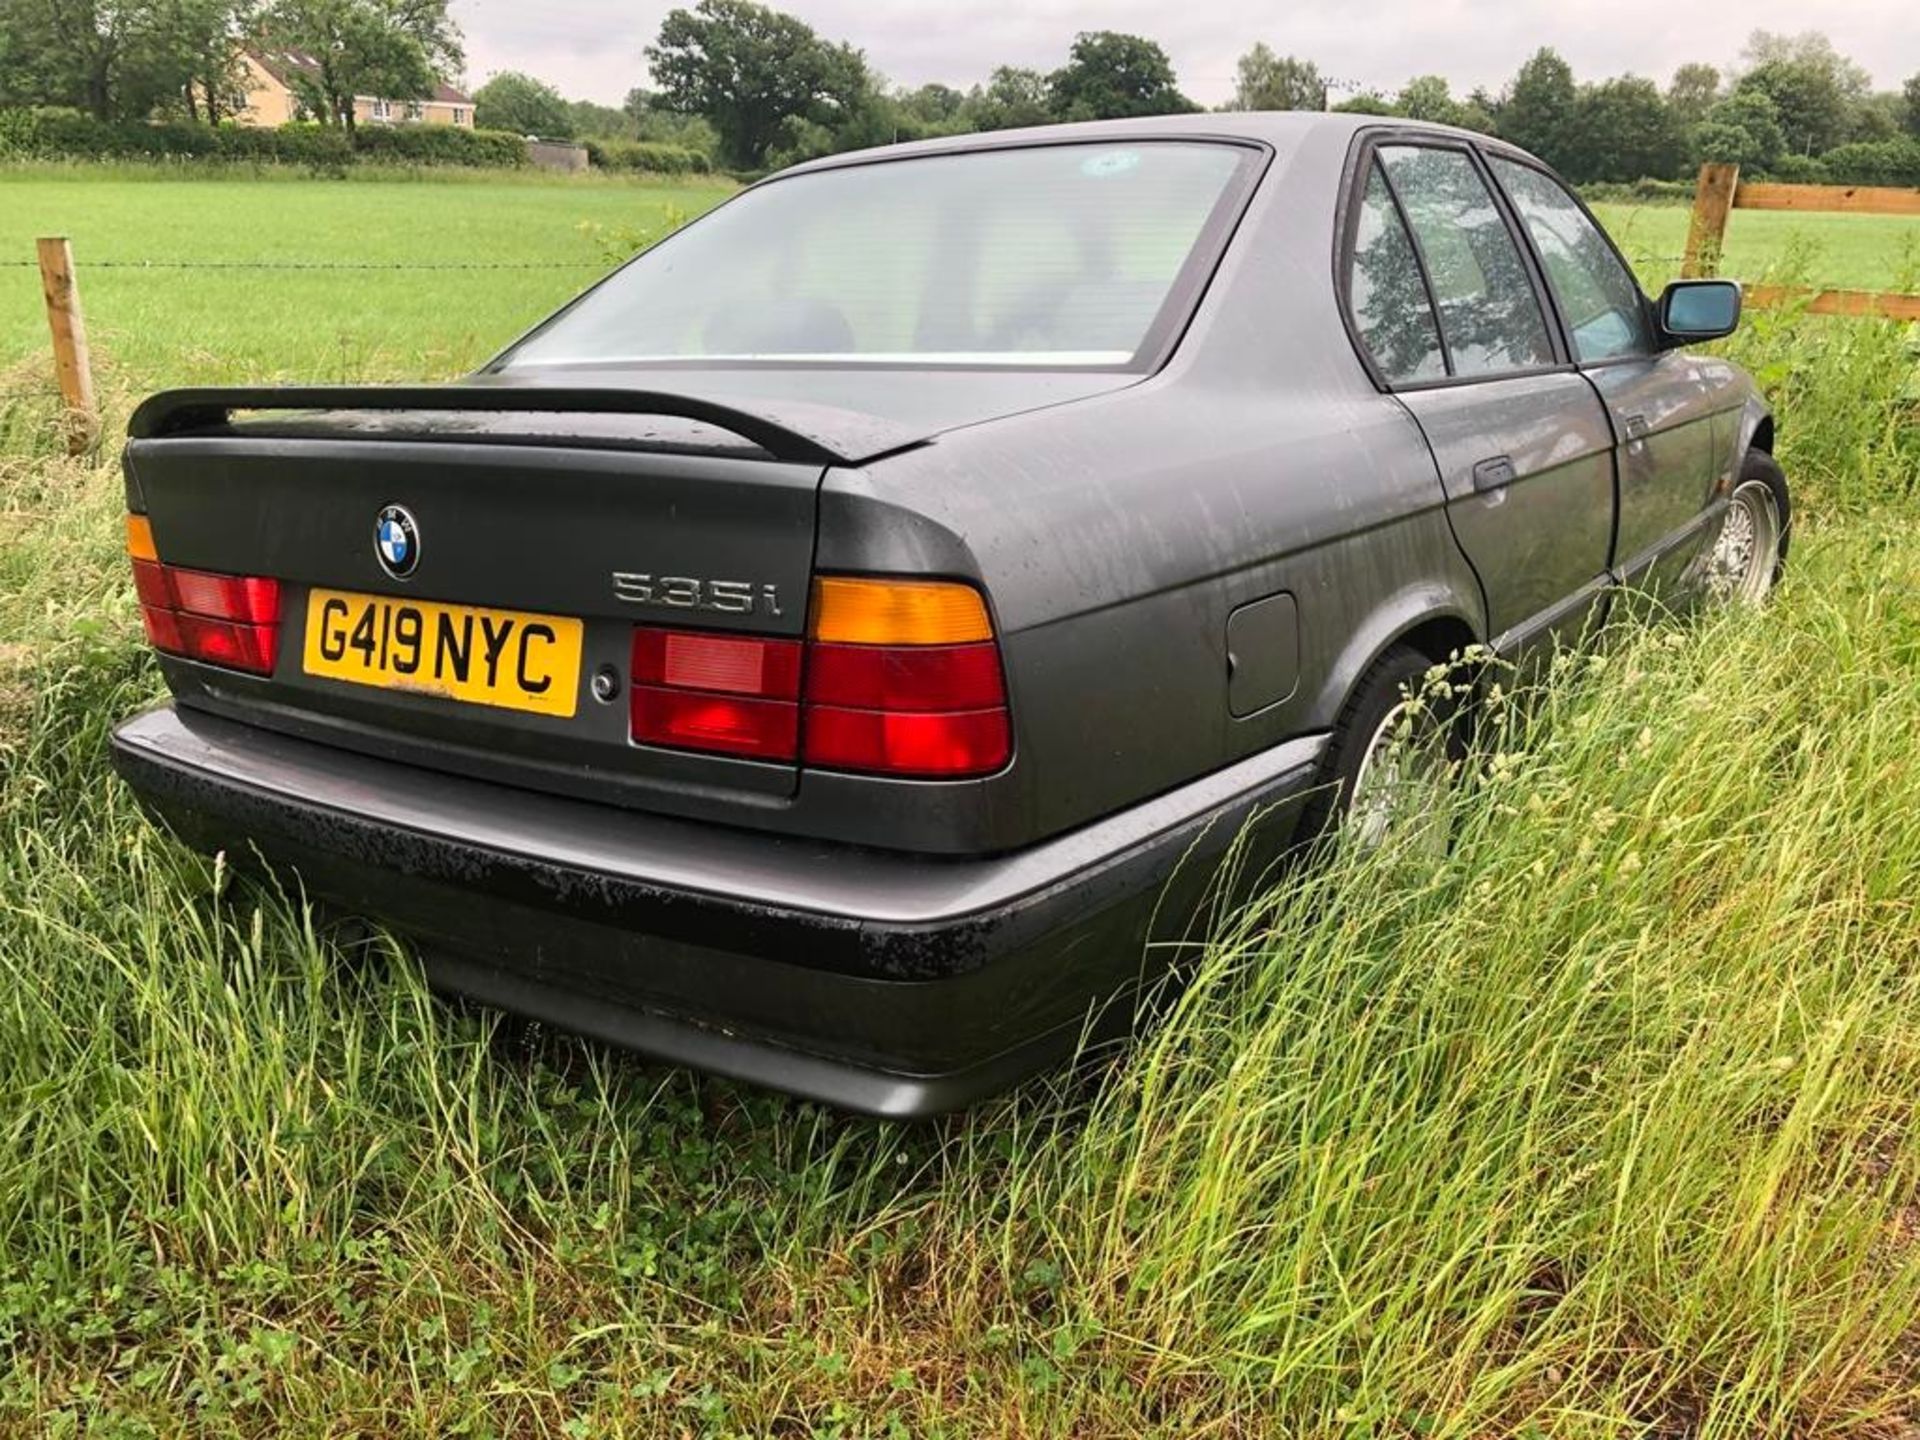 1990 BMW 535i Registration number G419 NYC Being sold without reserve One owner Black with a black - Image 5 of 40